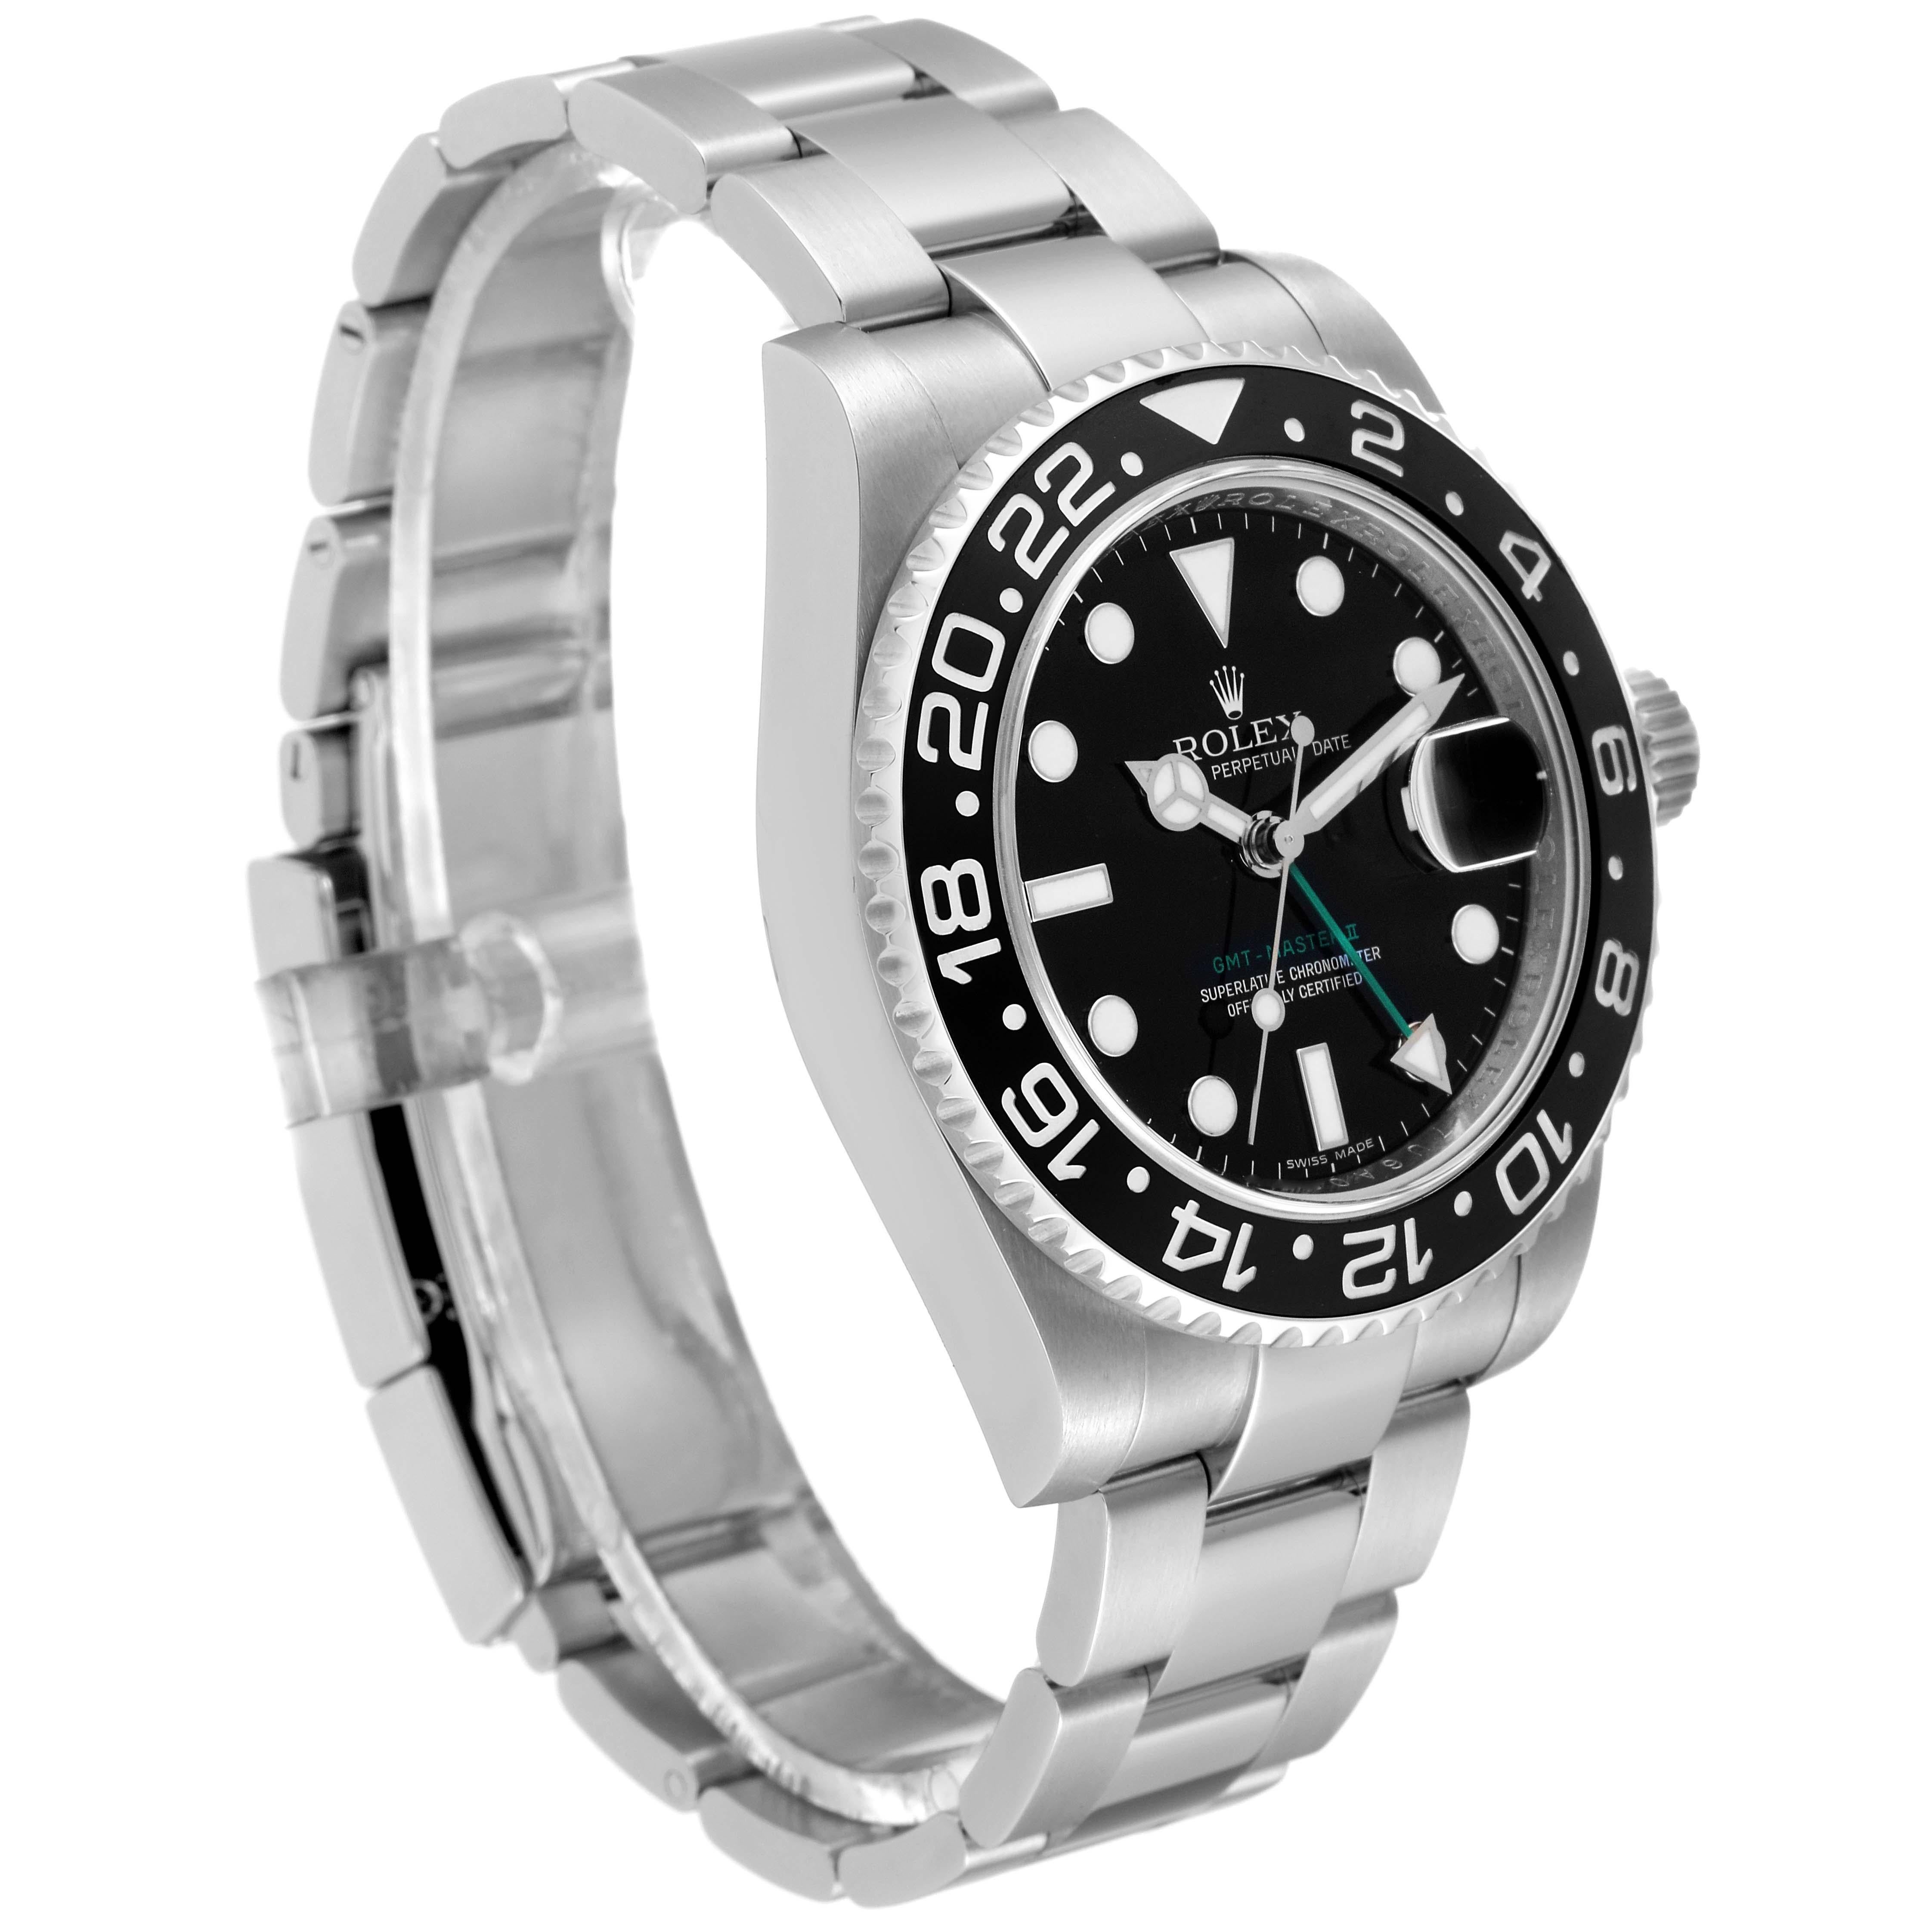 Rolex GMT Master II Black Dial Green Hand Steel Mens Watch 116710 Box Card In Excellent Condition For Sale In Atlanta, GA